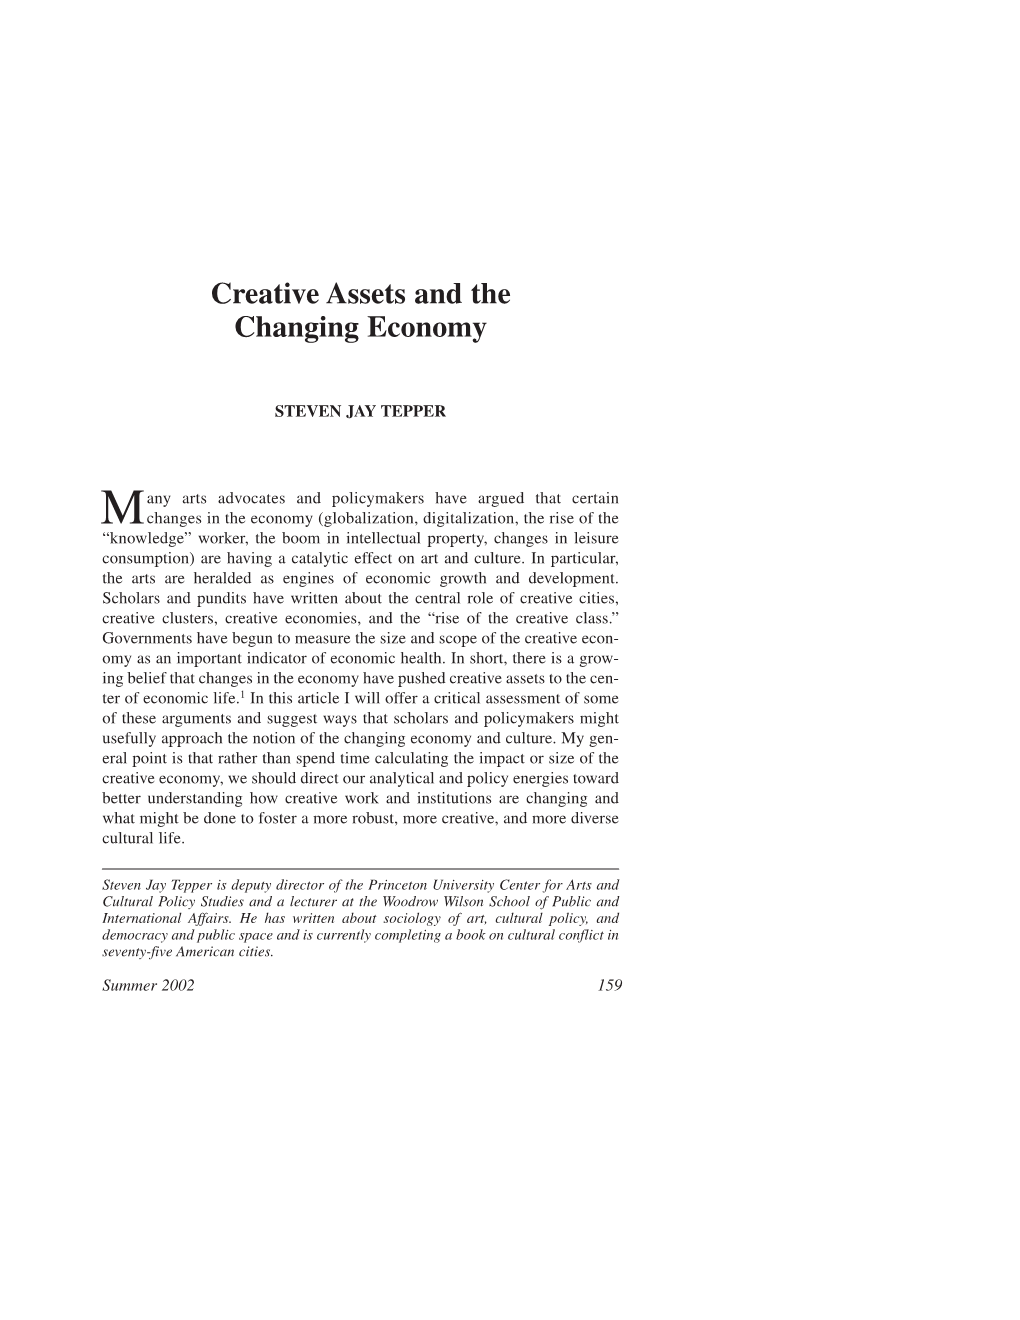 Creative Assets and the Changing Economy